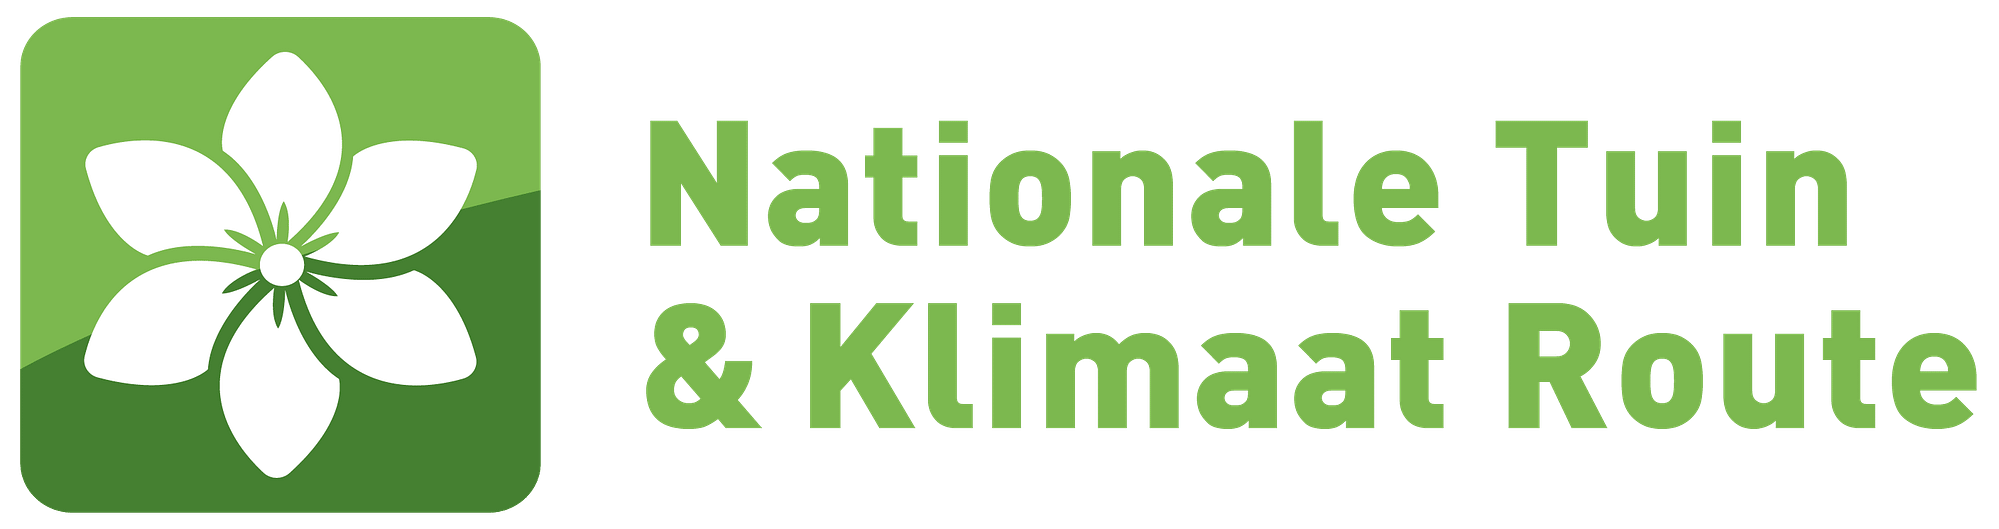 Nationale Tuin & Klimaat Route